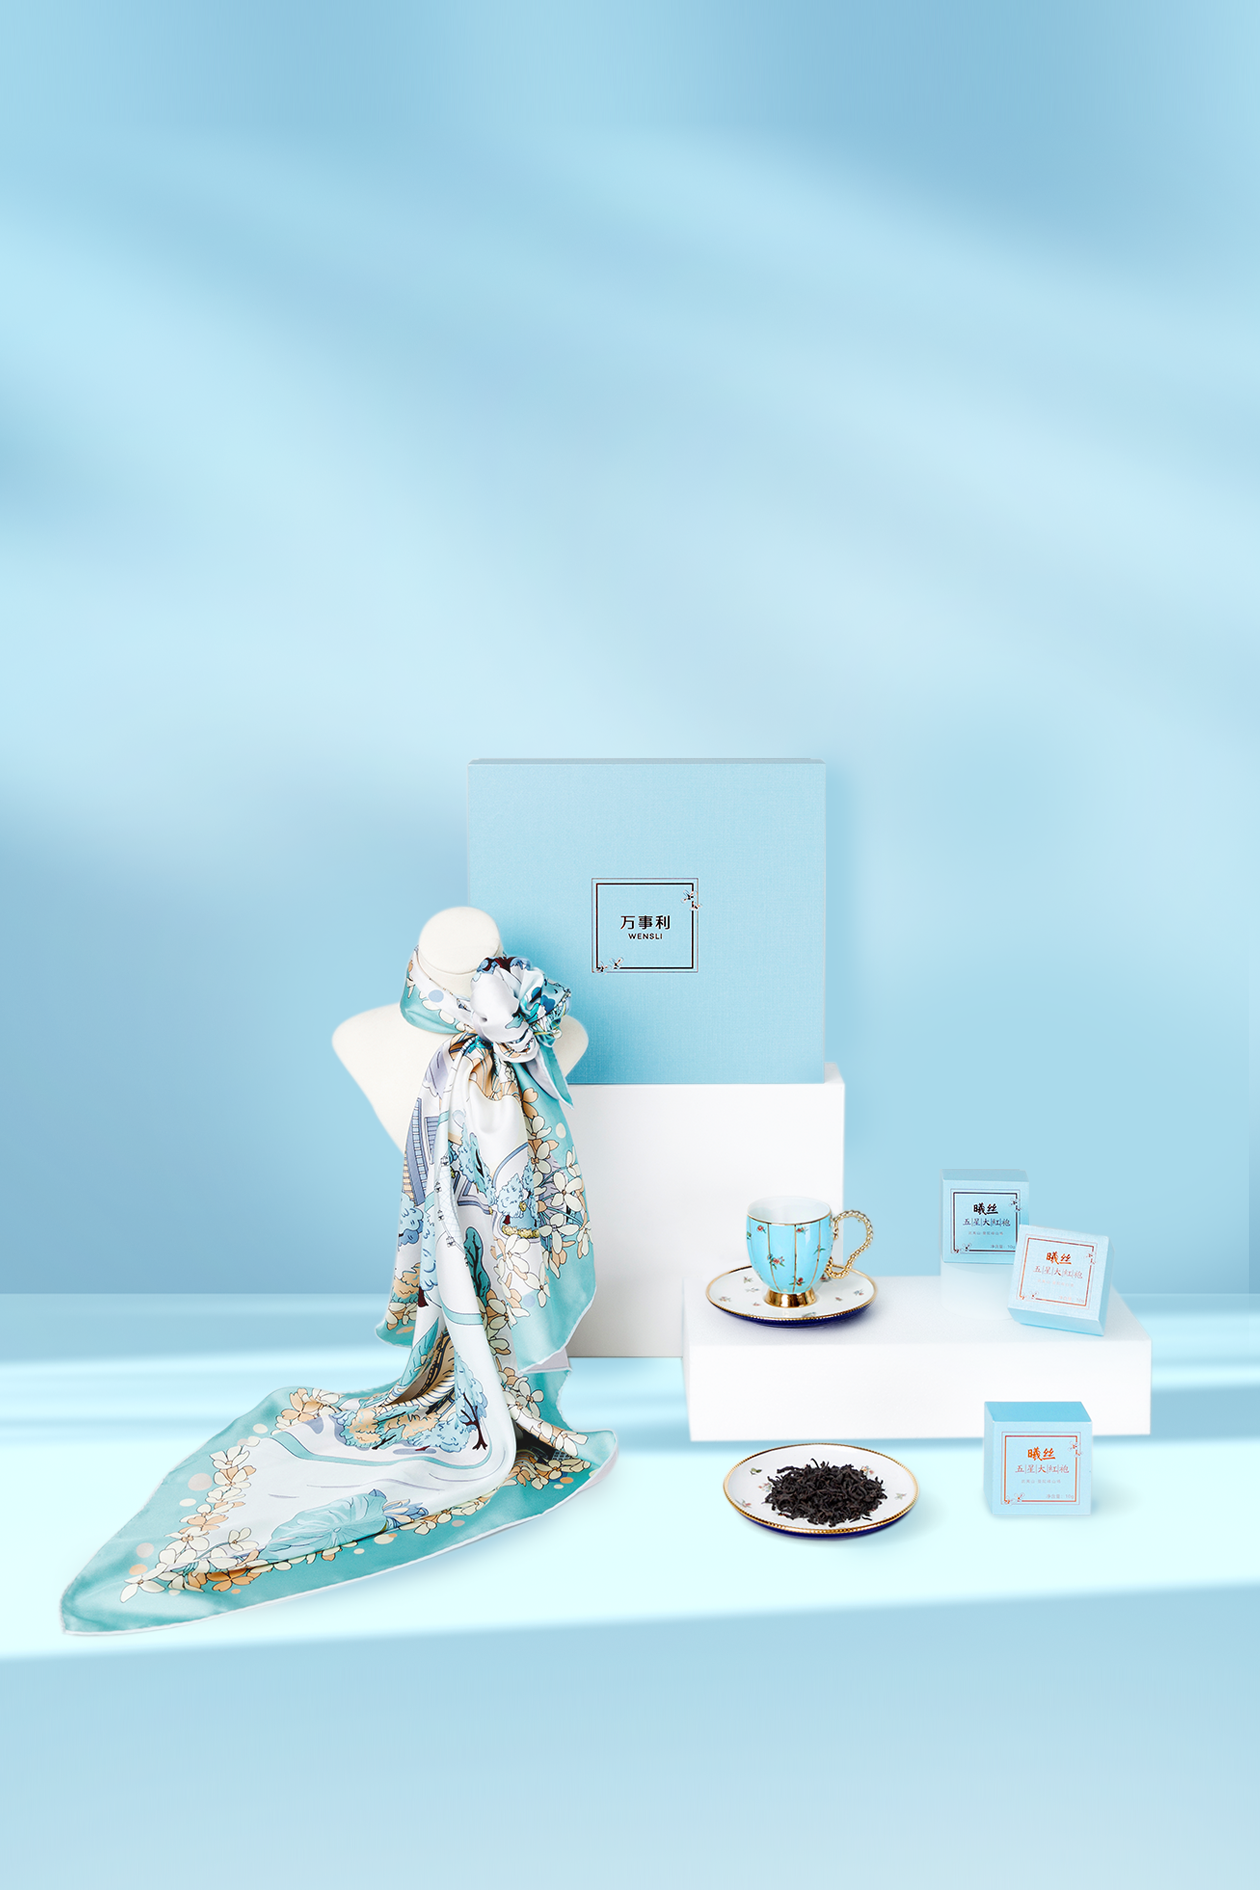 A gift box features a tea set and a silk scarf created by a time-honored Chinese brand. /Photo provided to CGTN